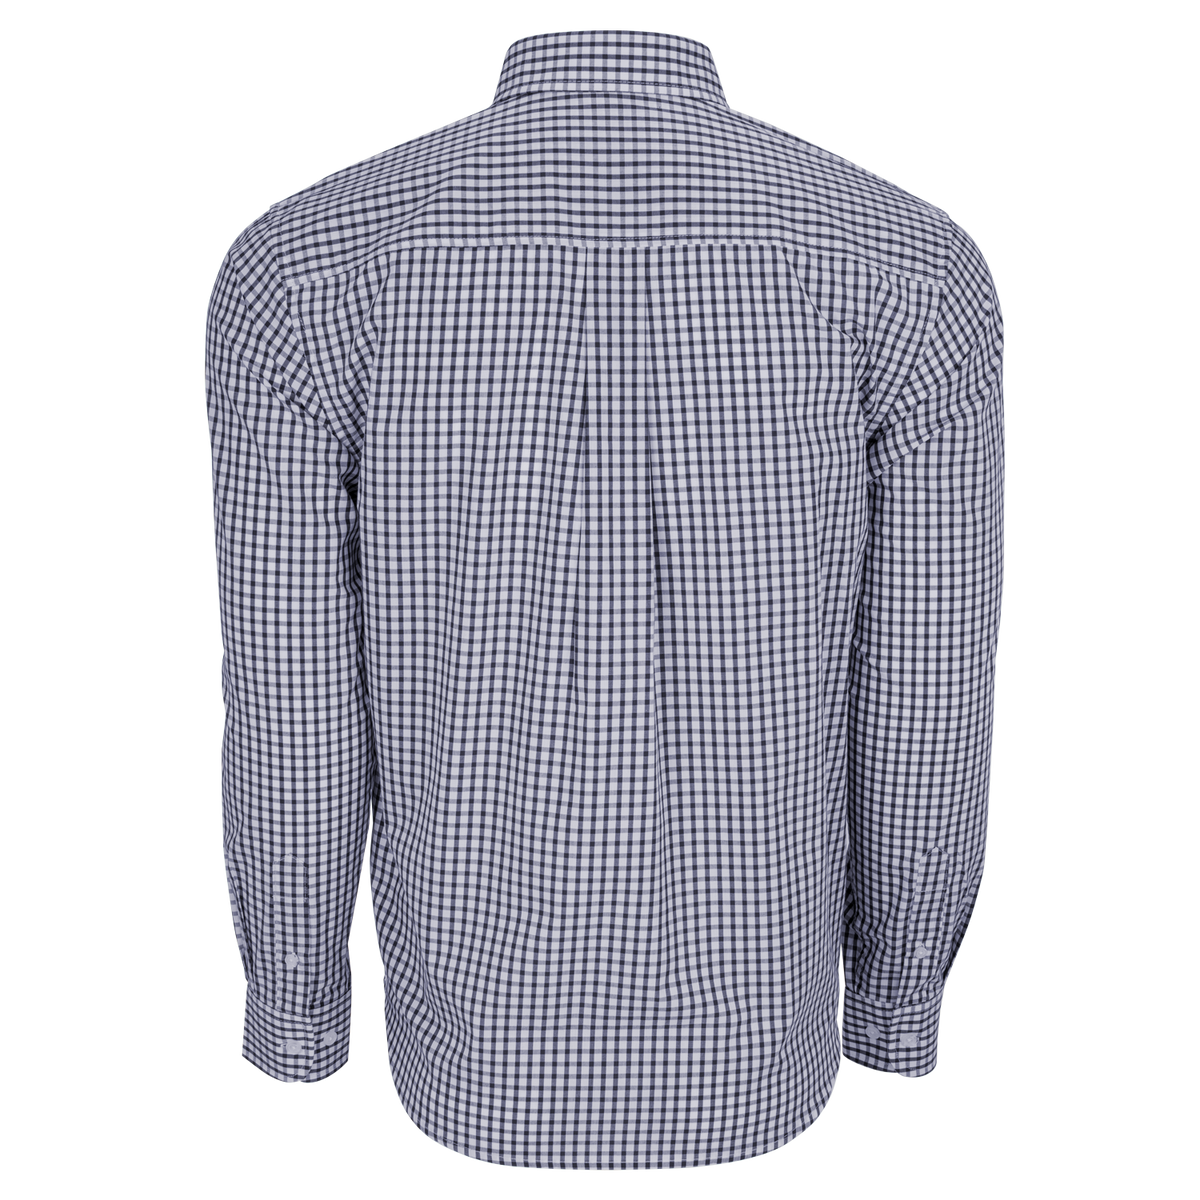 Easy-Care Gingham Check Button-Down Shirt